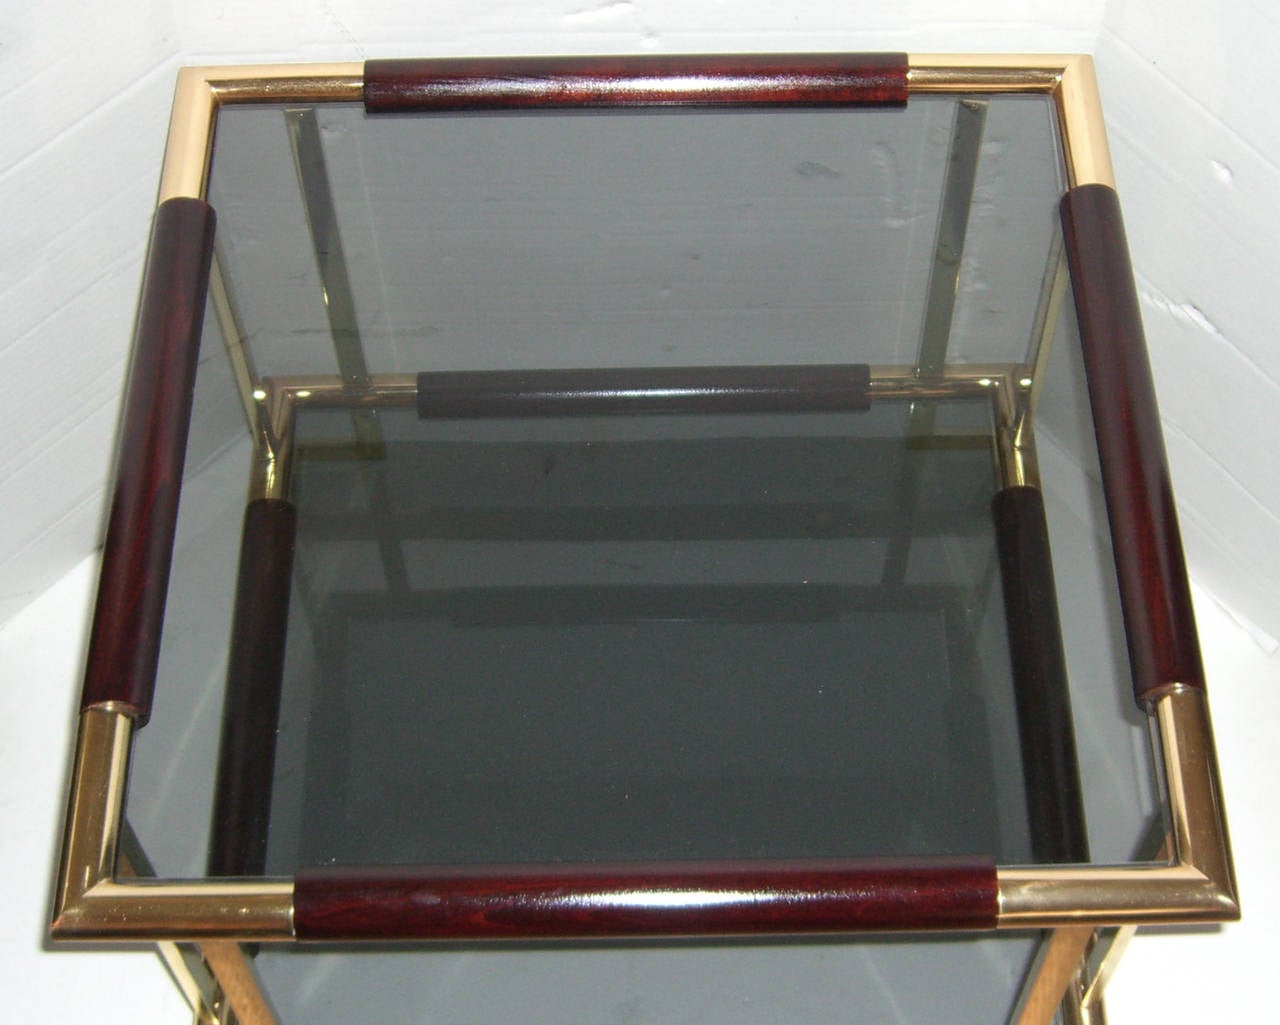 A square side table with a polished brass and dark walnut toned wood frame. The upper and lower glass shelves are smokey grey.